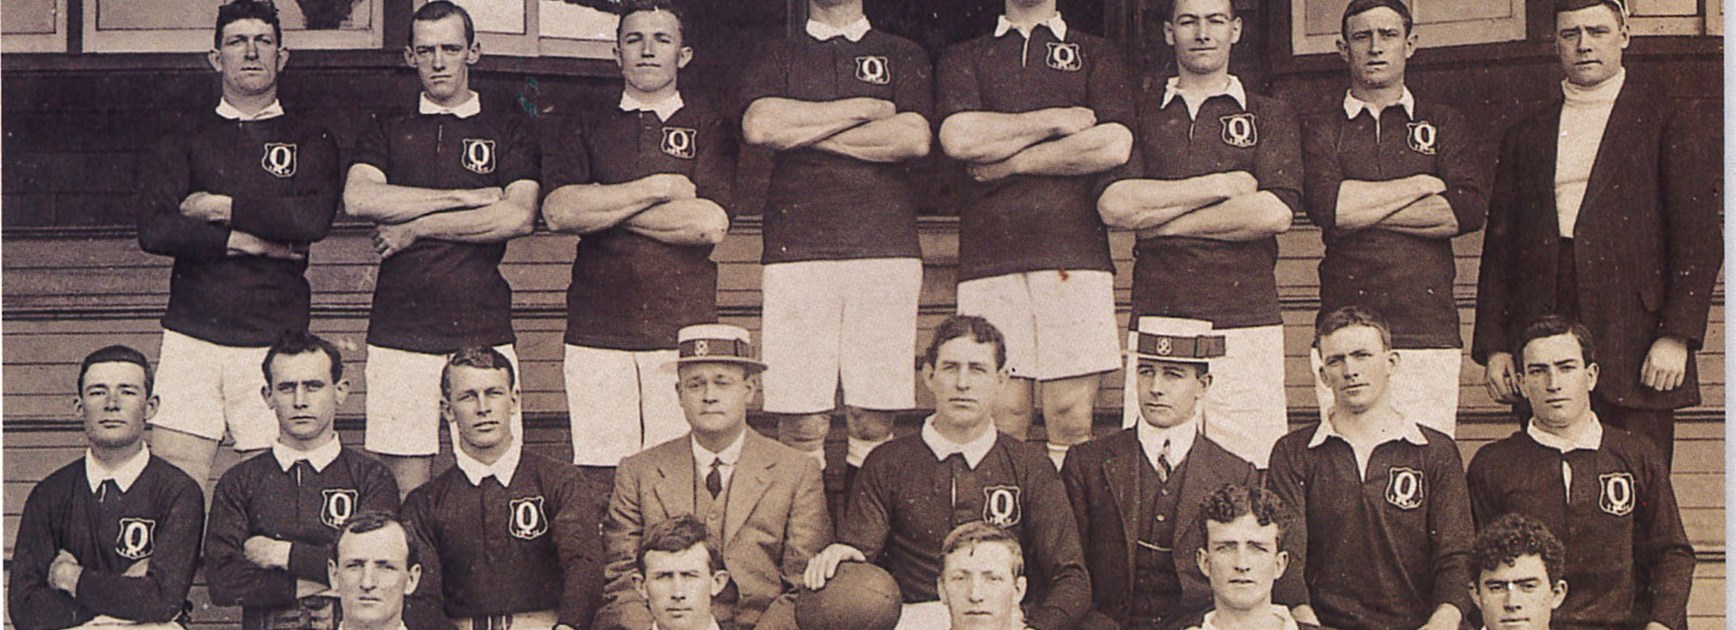 The Queensland Rugby League team of 1911.